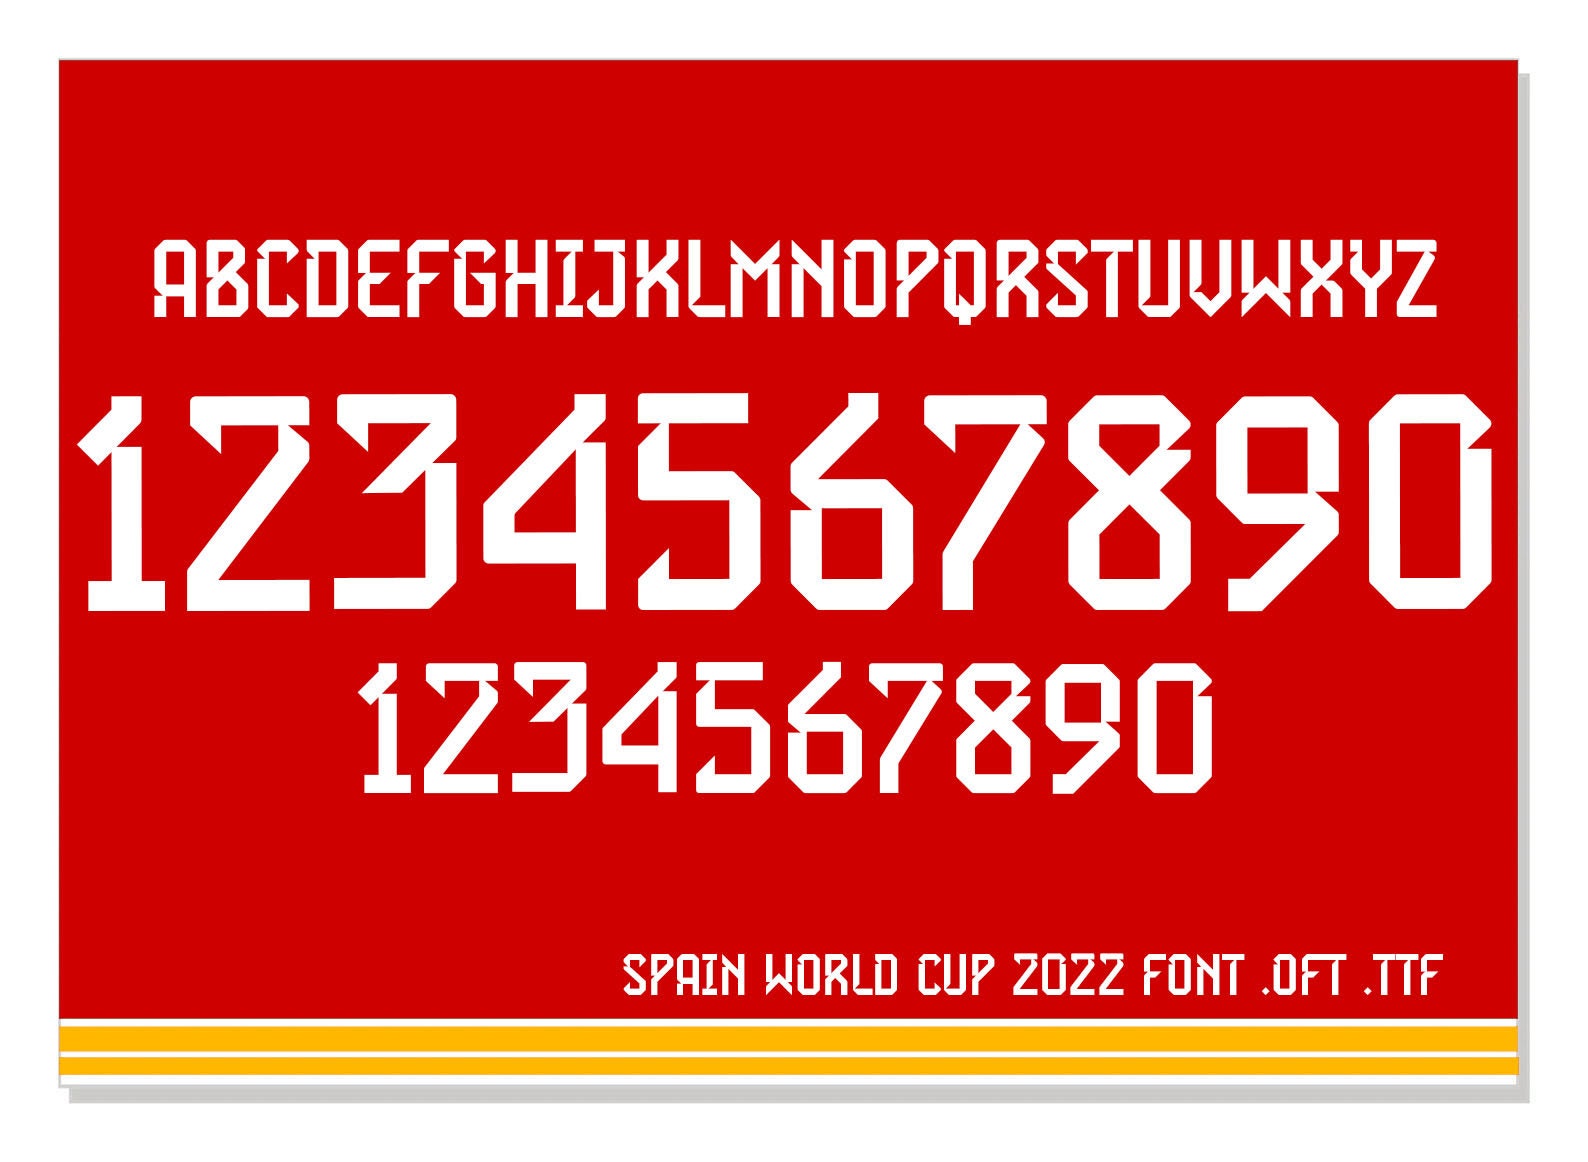 Other places I'm sorry About setting Spain World Cup 2022 Jersey Font .OFT .TTF - Etsy India